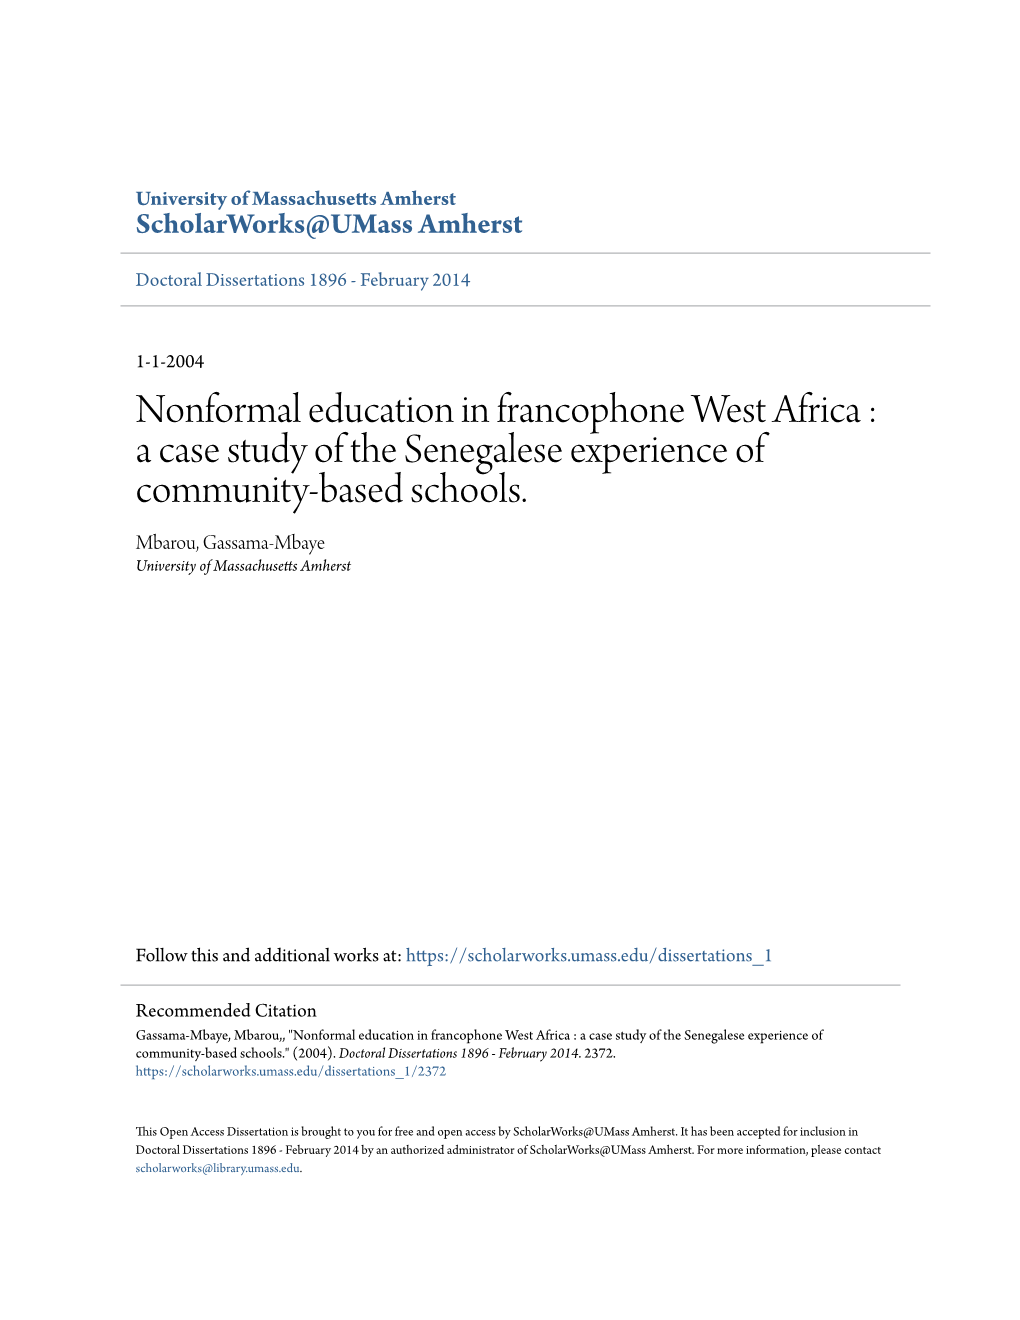 Nonformal Education in Francophone West Africa : a Case Study of the Senegalese Experience of Community-Based Schools